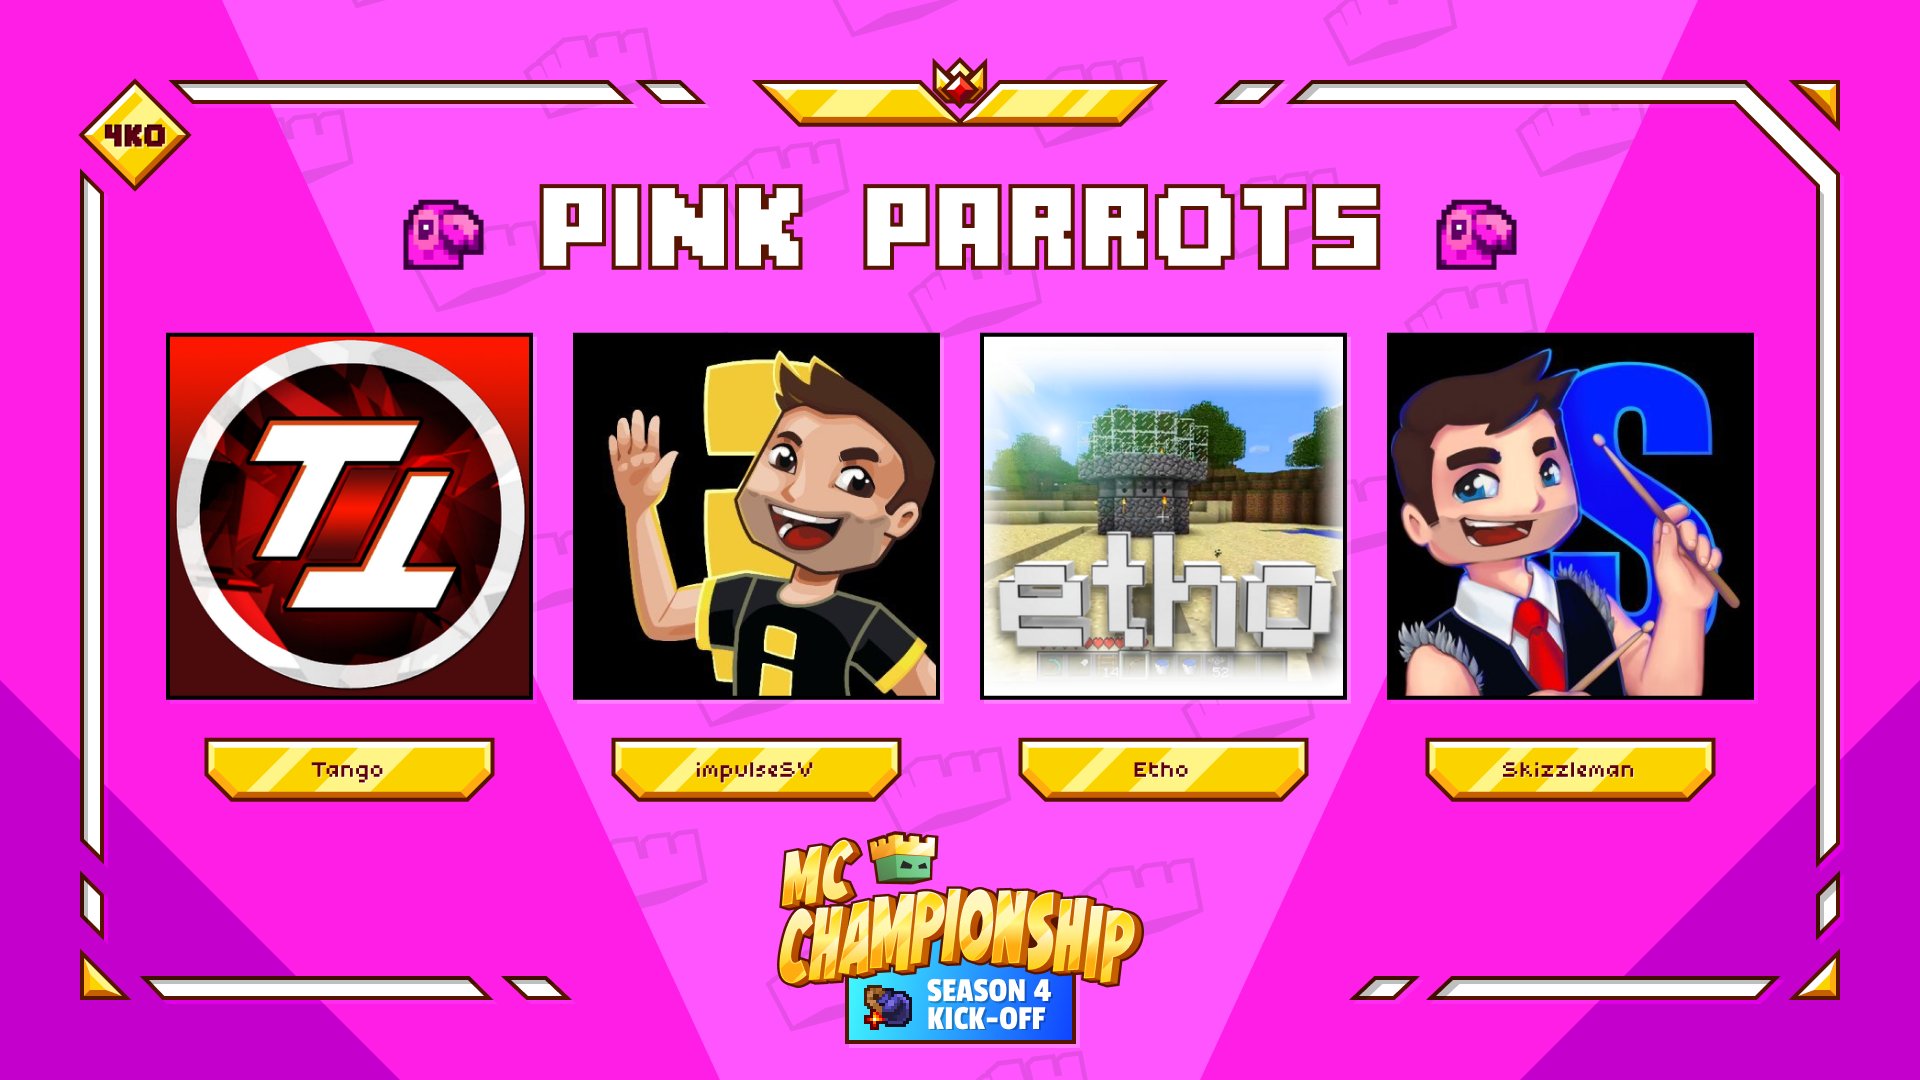 The Pink Parrots team for season 4 of the MC Championships.